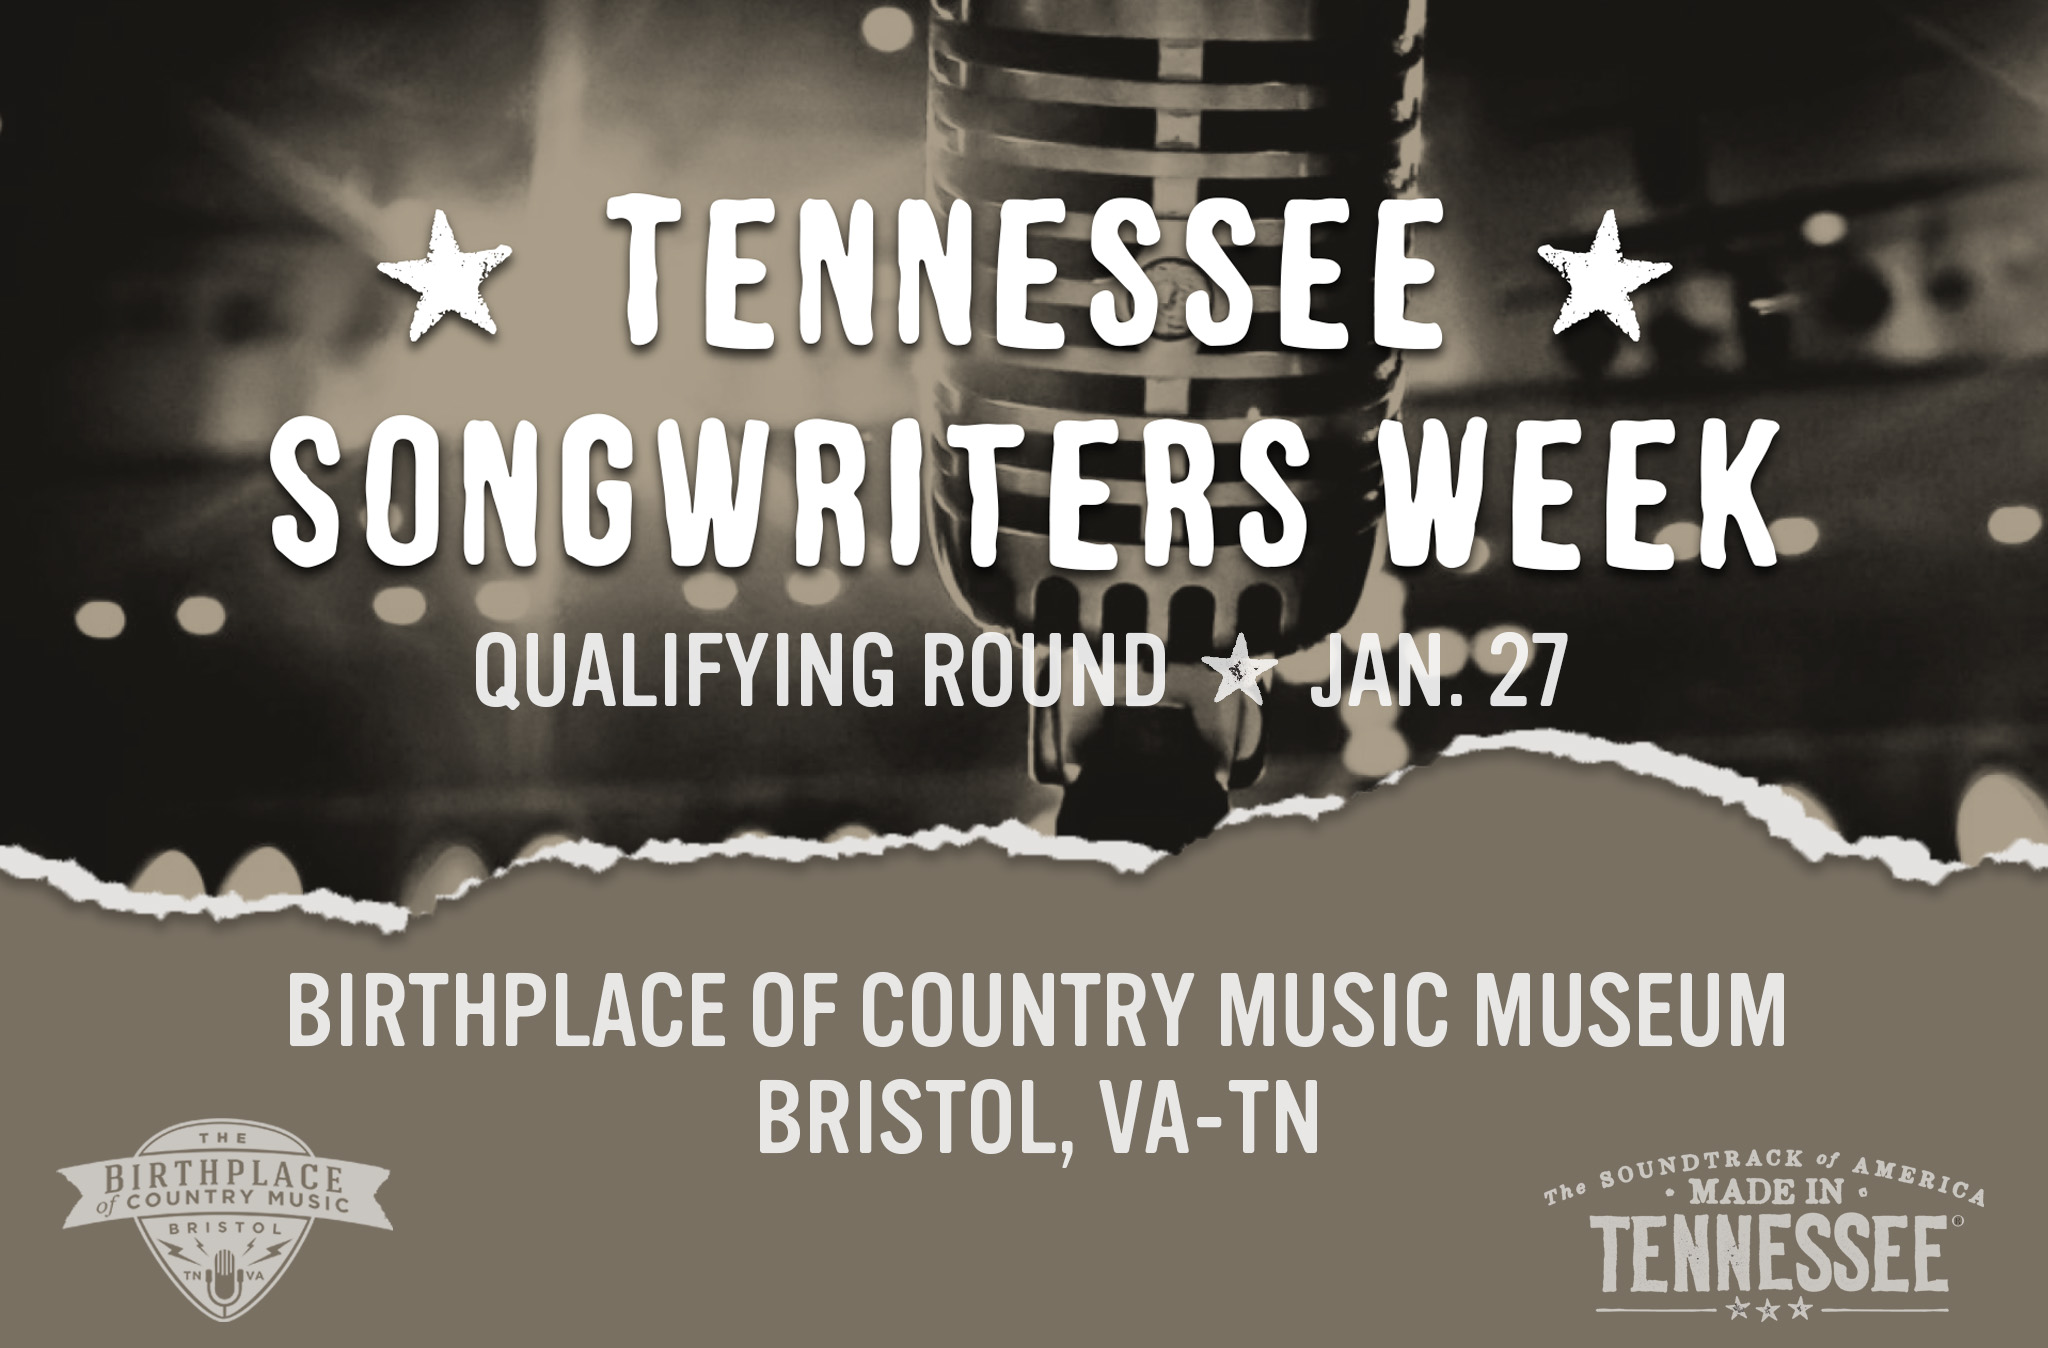 Tennessee Songwriters Week Graphic with a vintage microphone in the background. Graphic states the qualifying round date of Jan. 27 at the Birthplace of Country Music Museum in Bristol, VA-TN